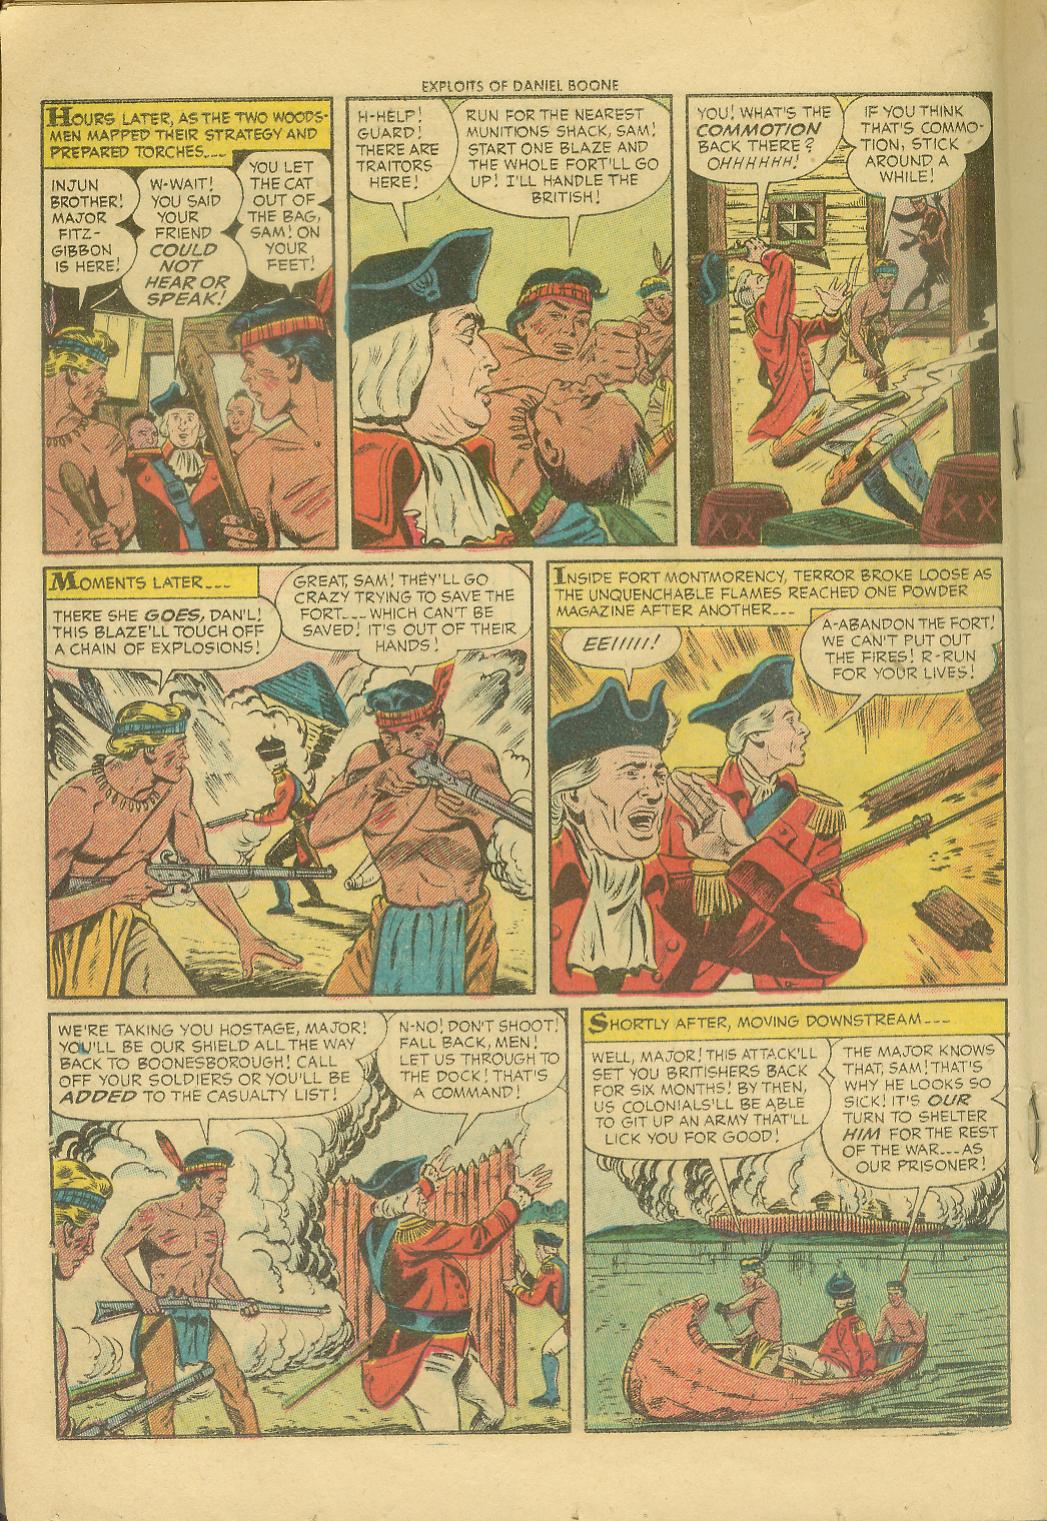 Read online Exploits of Daniel Boone comic -  Issue #6 - 18